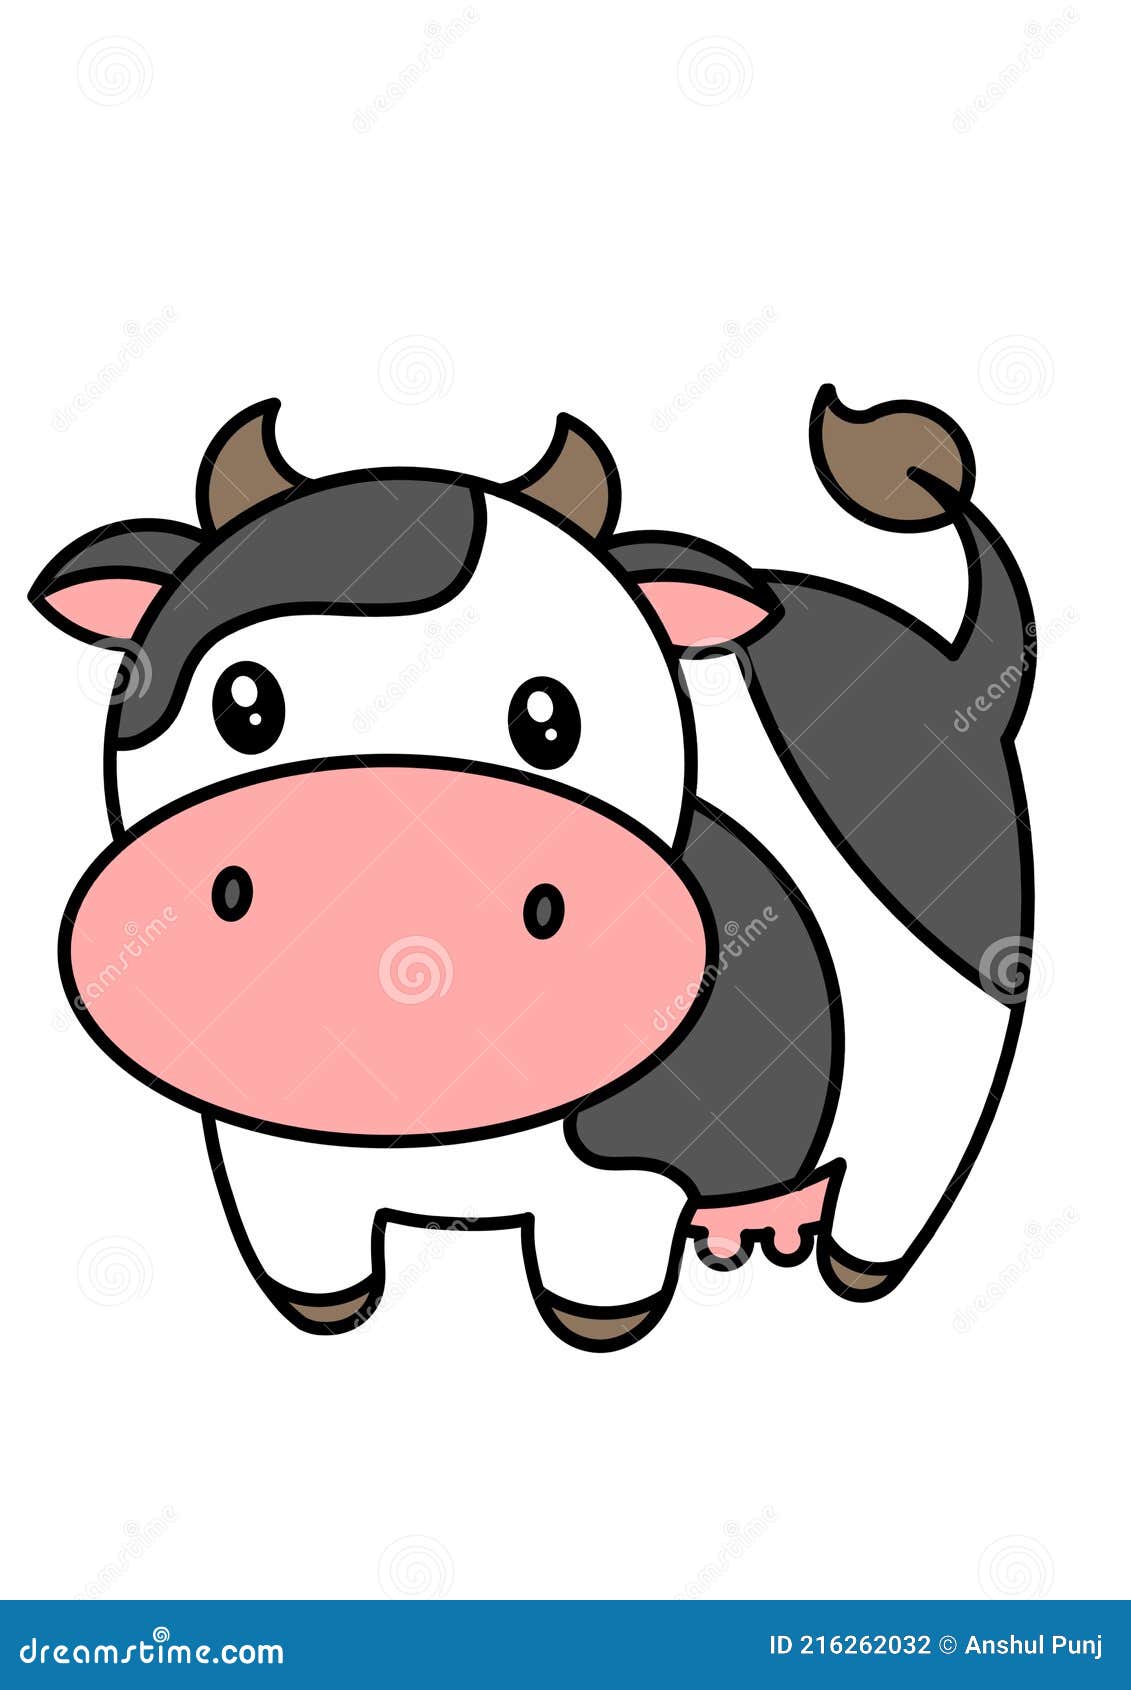 Cute Cow Drawing Colouring Page. Cute Cow with Beautiful Eyes. Colour the  Picture Stock Illustration - Illustration of logo, cartoon: 216262032